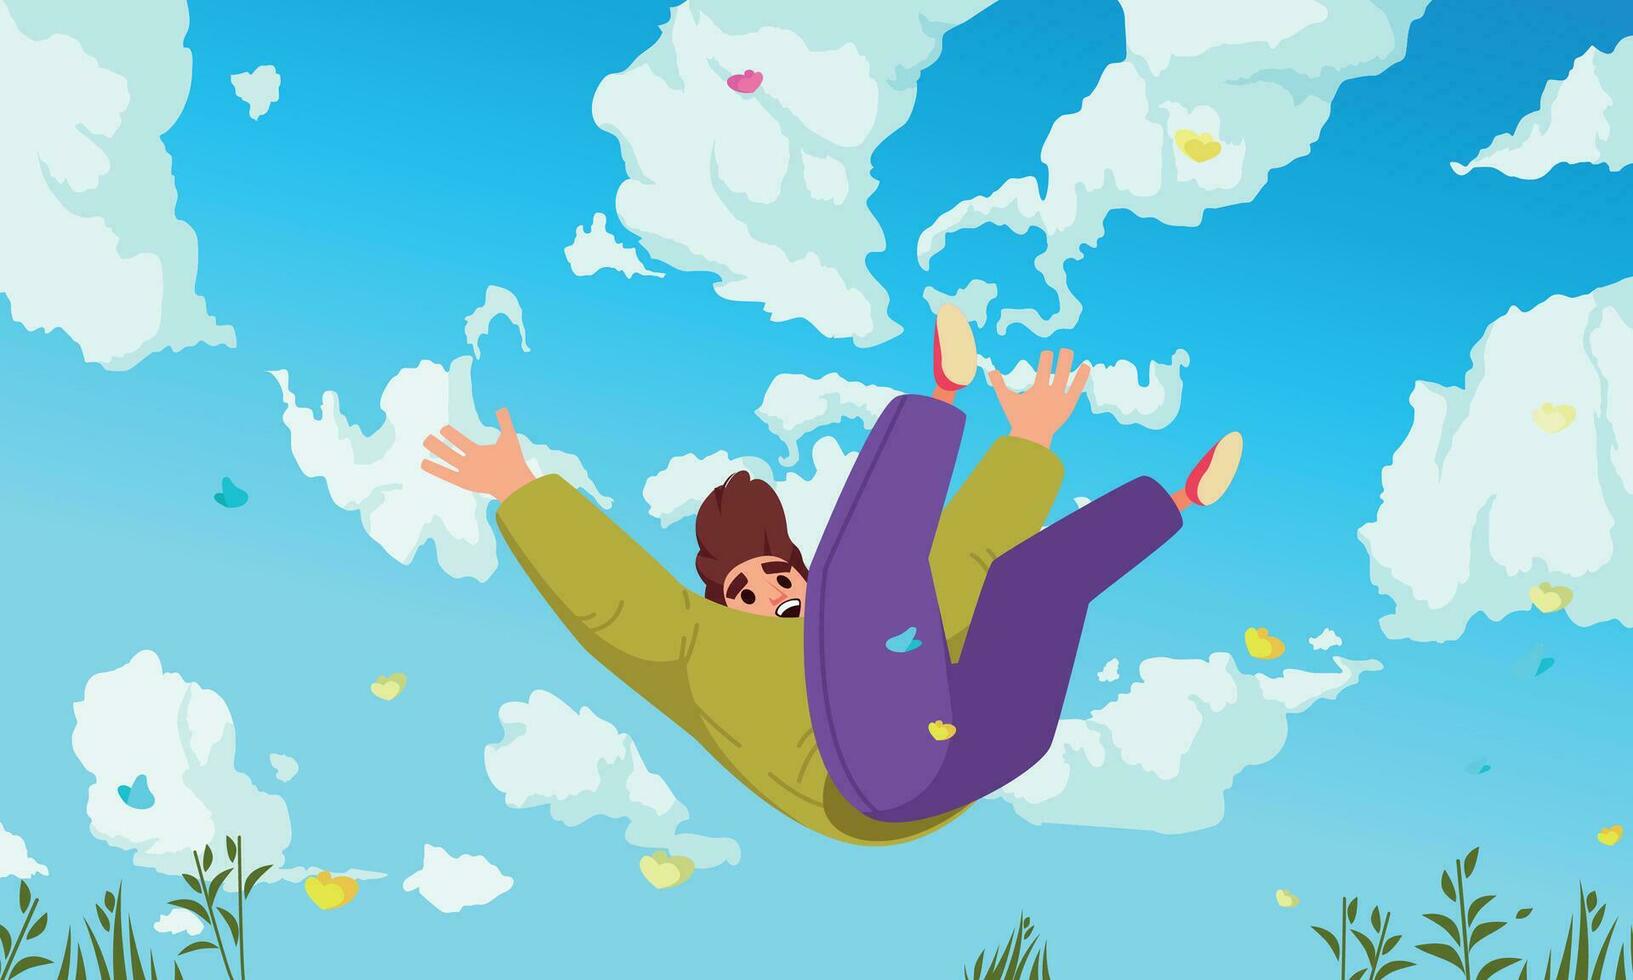 Falling People Concept vector